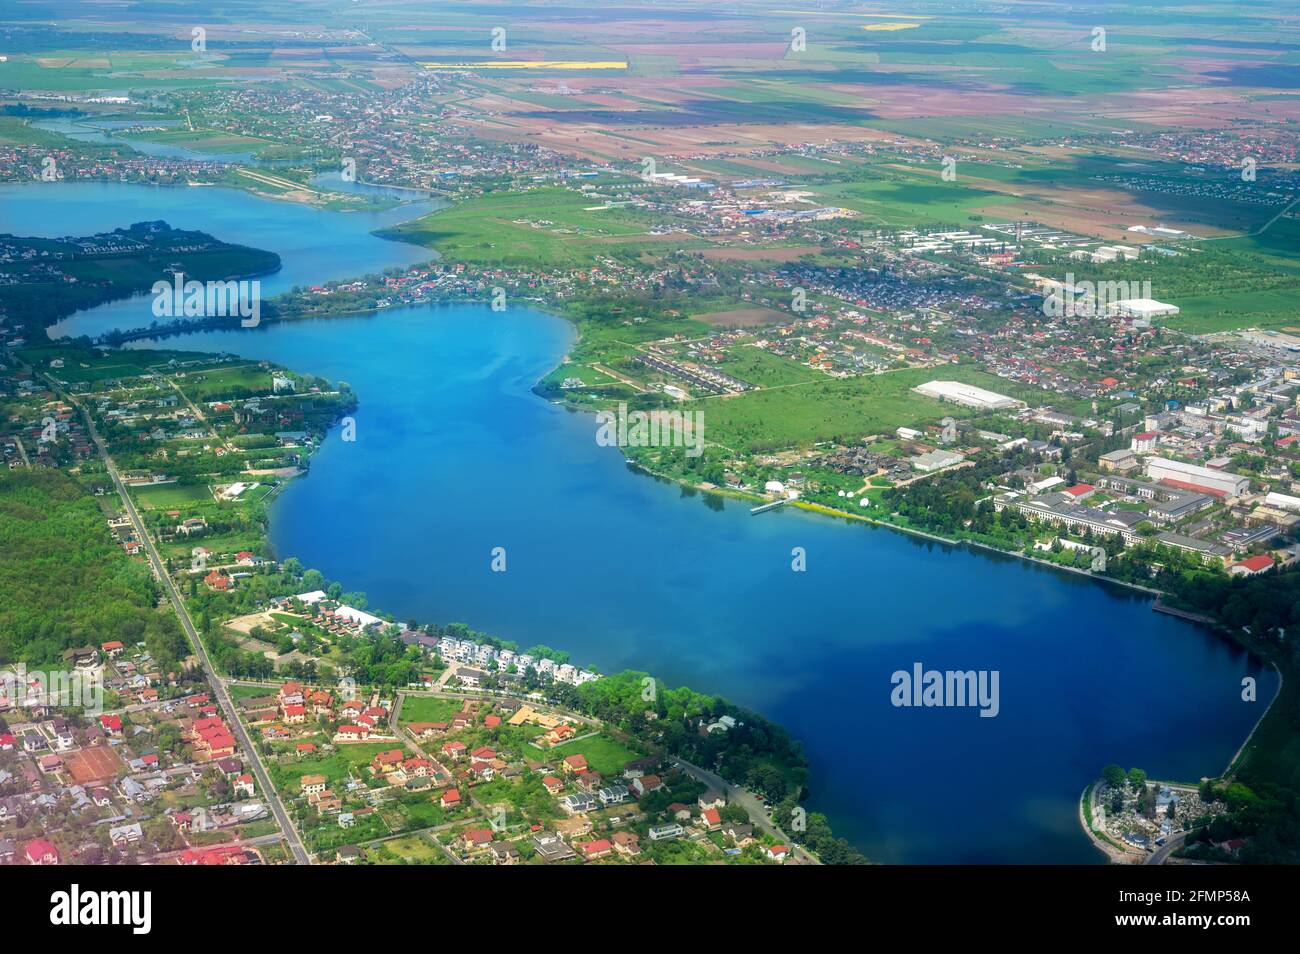 Aerial landscape view of a rural surroundings area and a blue river in Bucharest, Romania Stock Photo